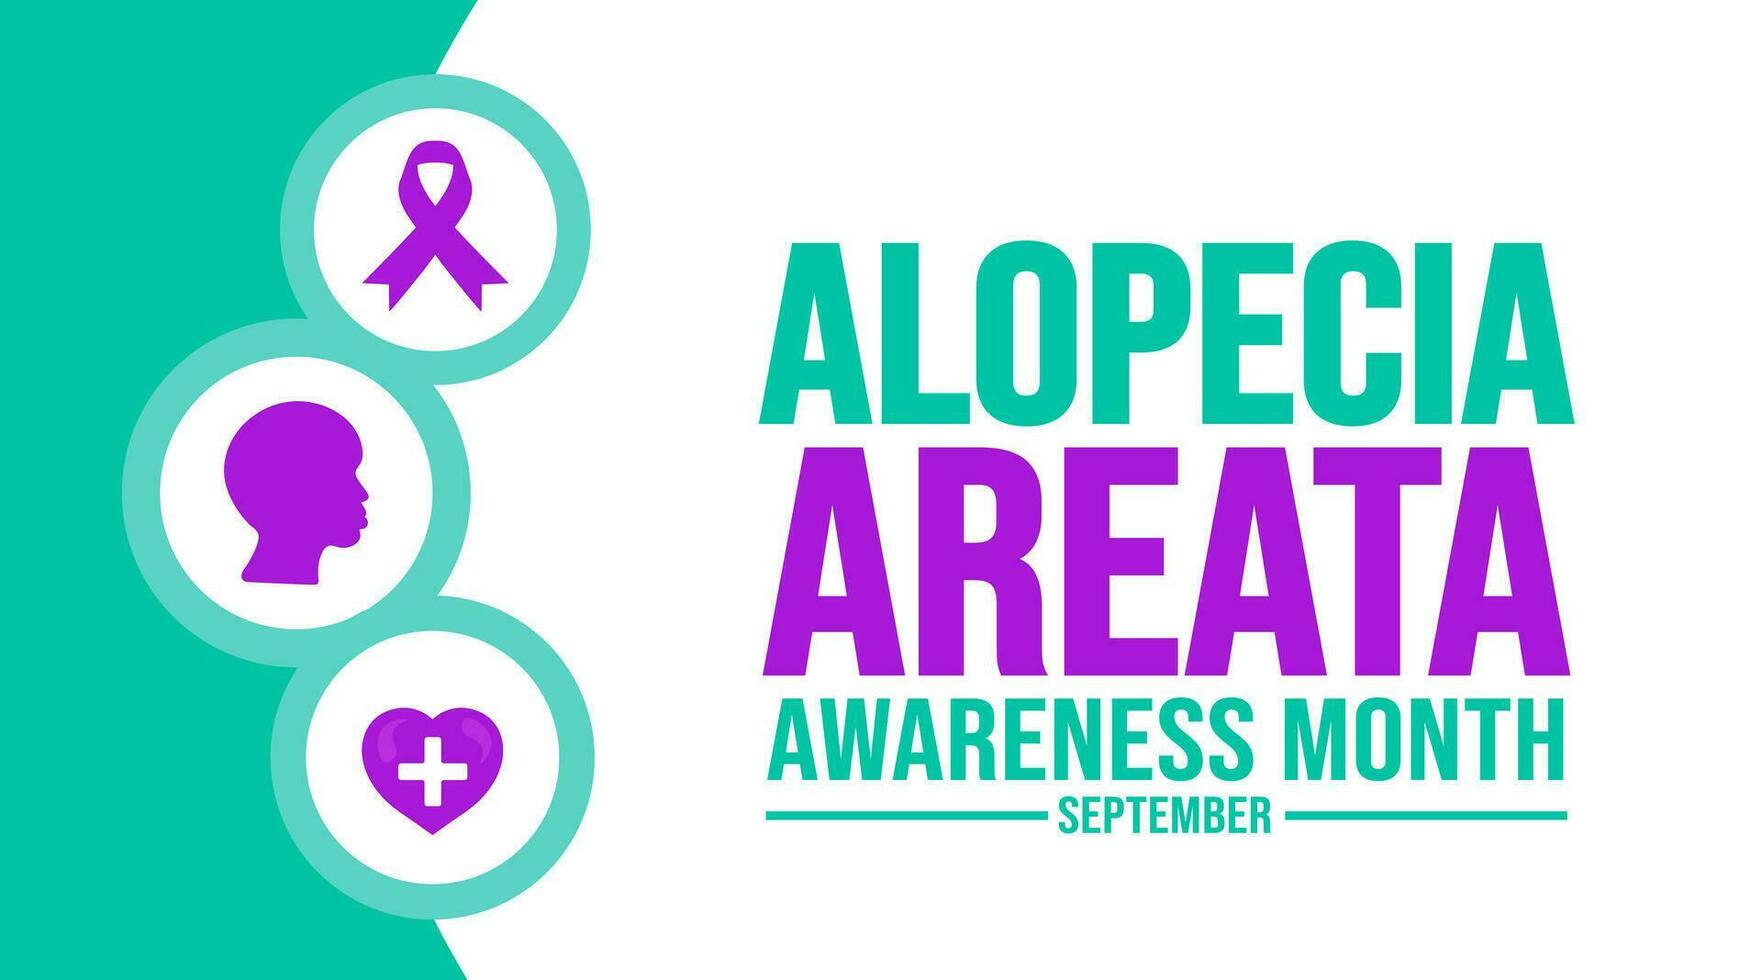 September is alopecia areata awareness month background template. Holiday concept. background, banner, placard, card, and poster design template with text inscription and standard color. vector